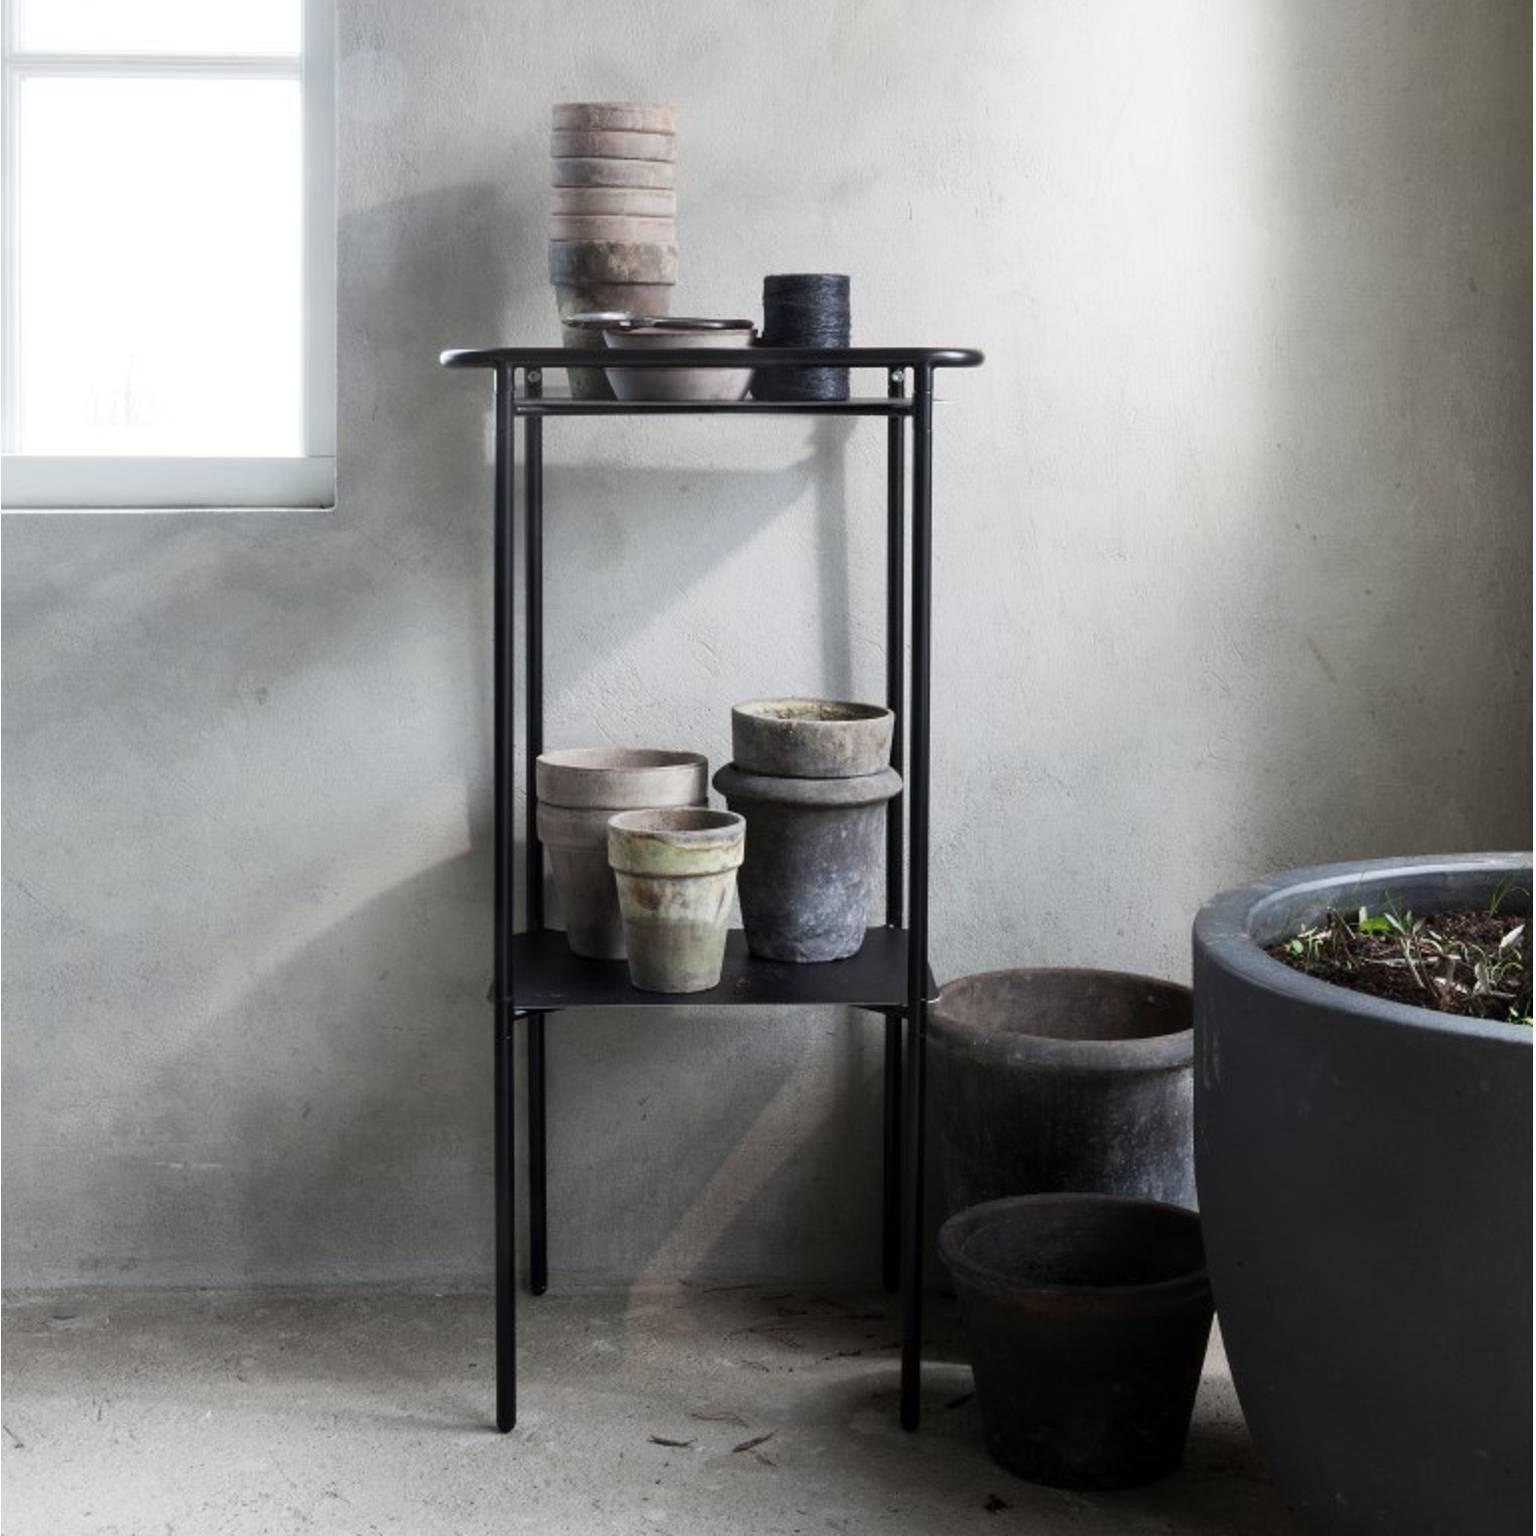 Chinese Copenhagen Tray Table by Norm Architects, in Black Steel